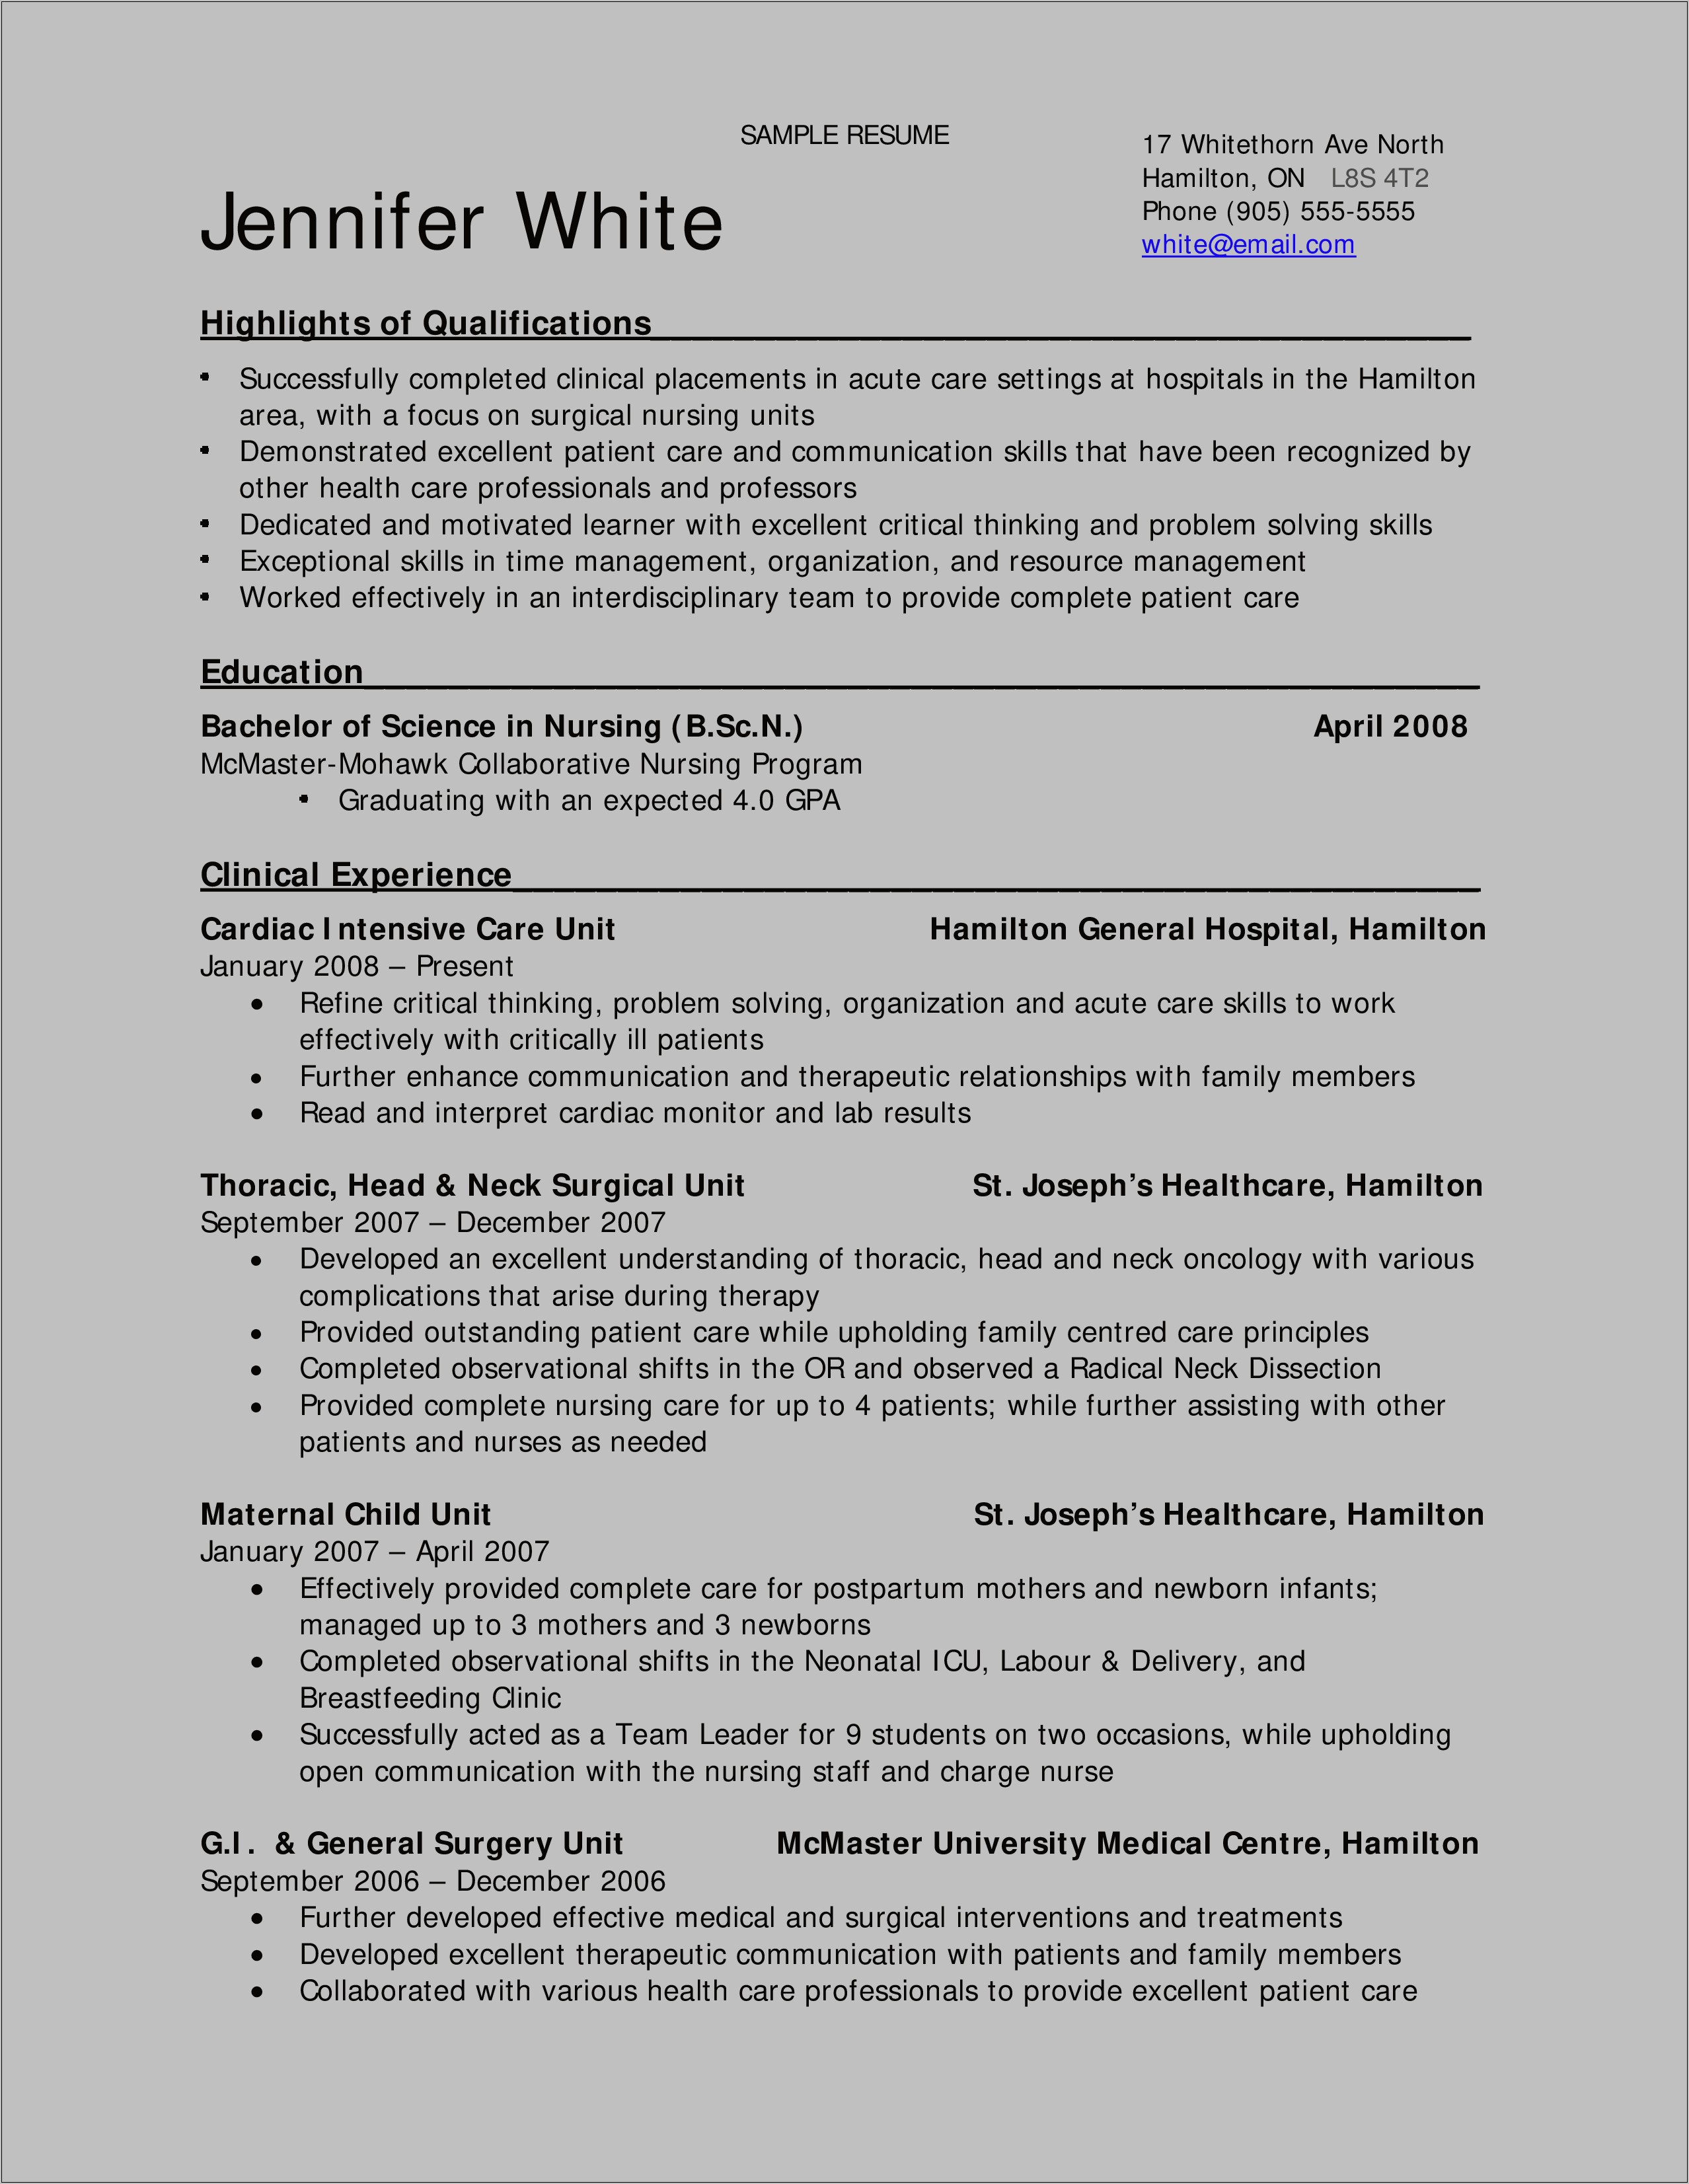 Samples Of Resume For A Health Care Professional